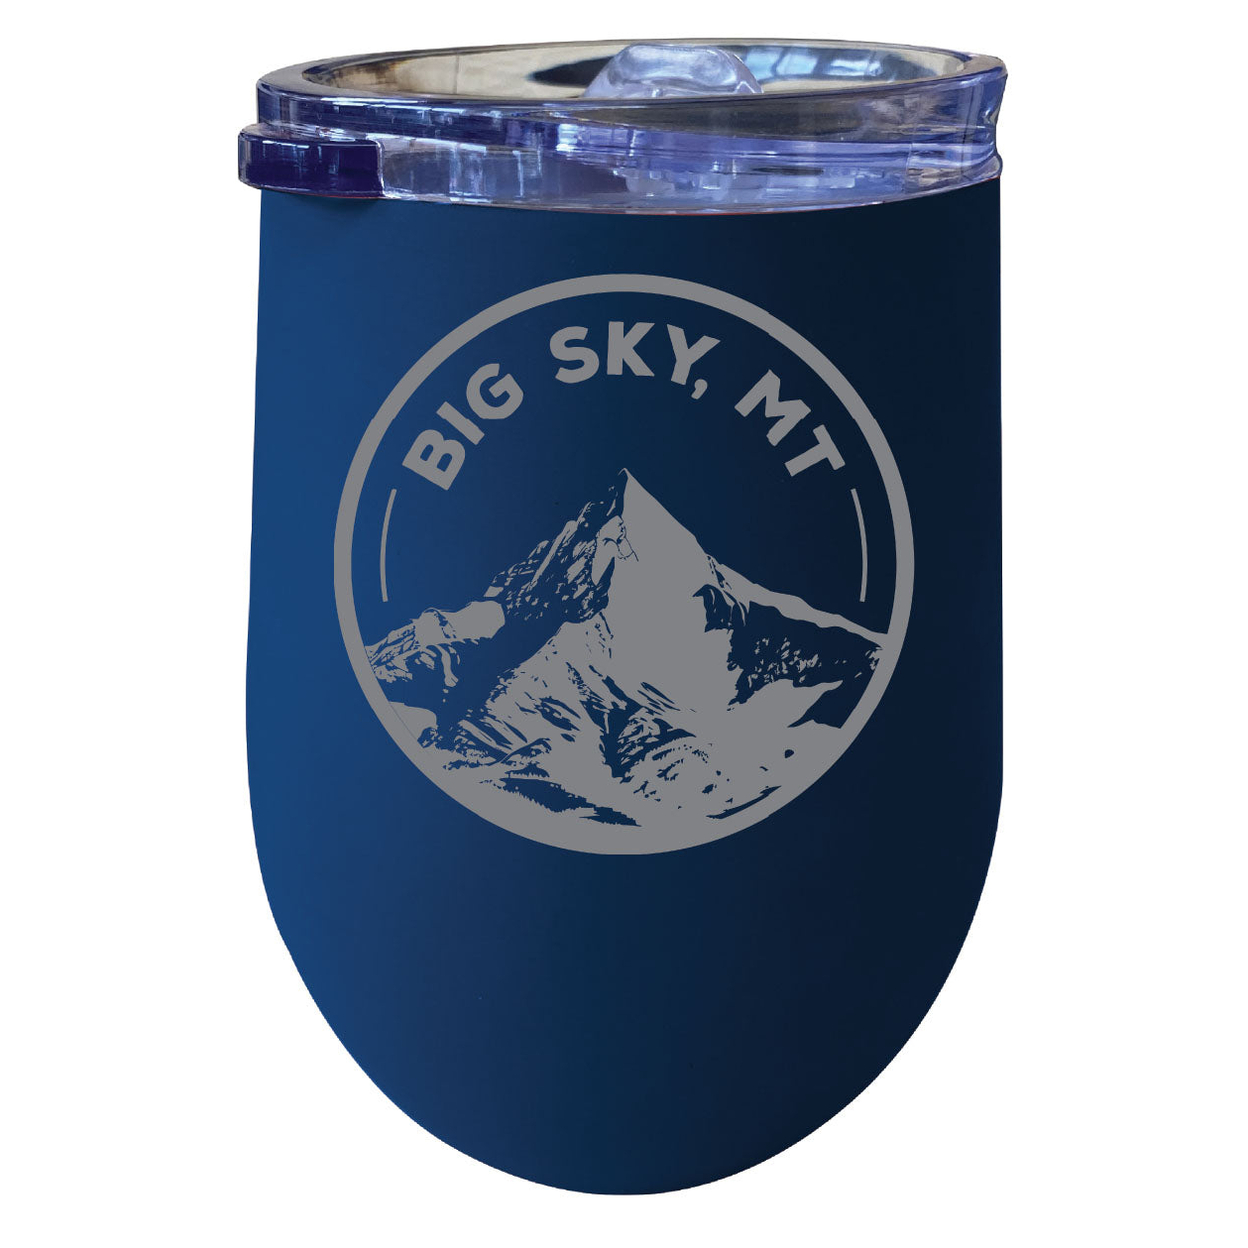 Big Sky Montana Souvenir 12 Oz Engraved Insulated Wine Stainless Steel Tumbler - Navy,,4-Pack